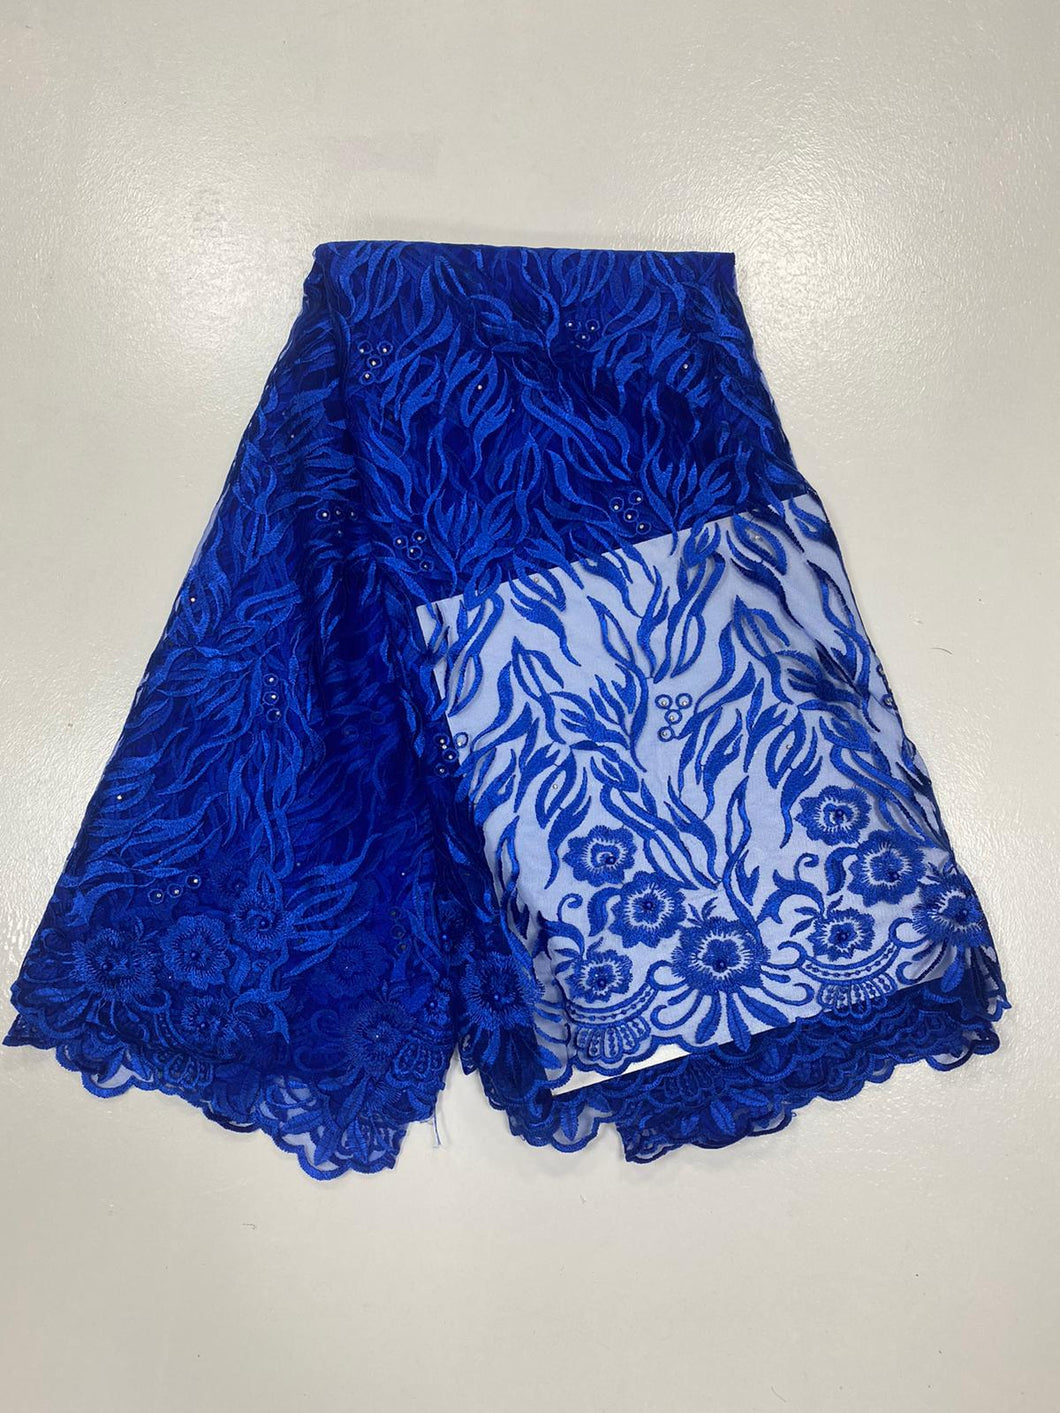 Royal Blue French Lace - 5 Yards